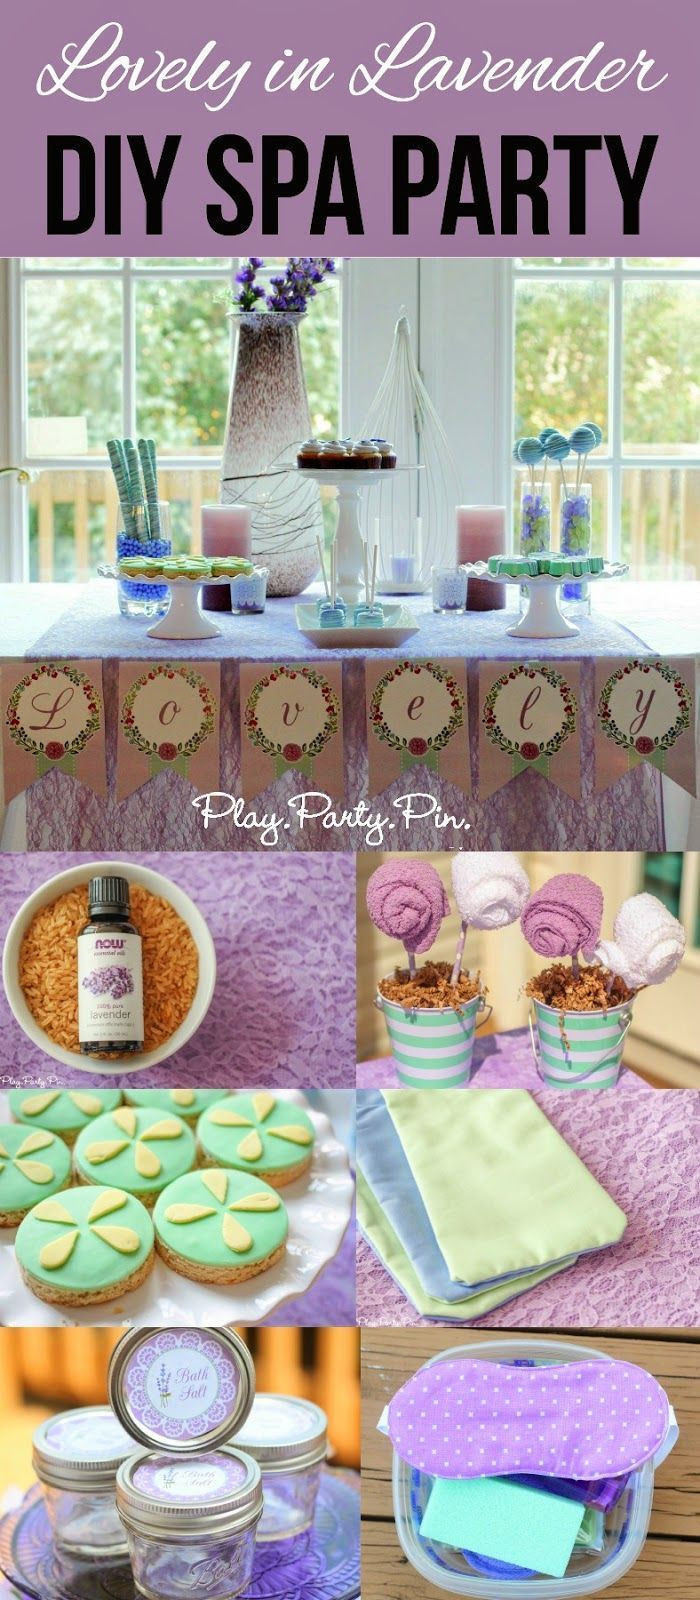 Craft Night Ideas For Adults
 Lovely in Lavender DIY Spa Party